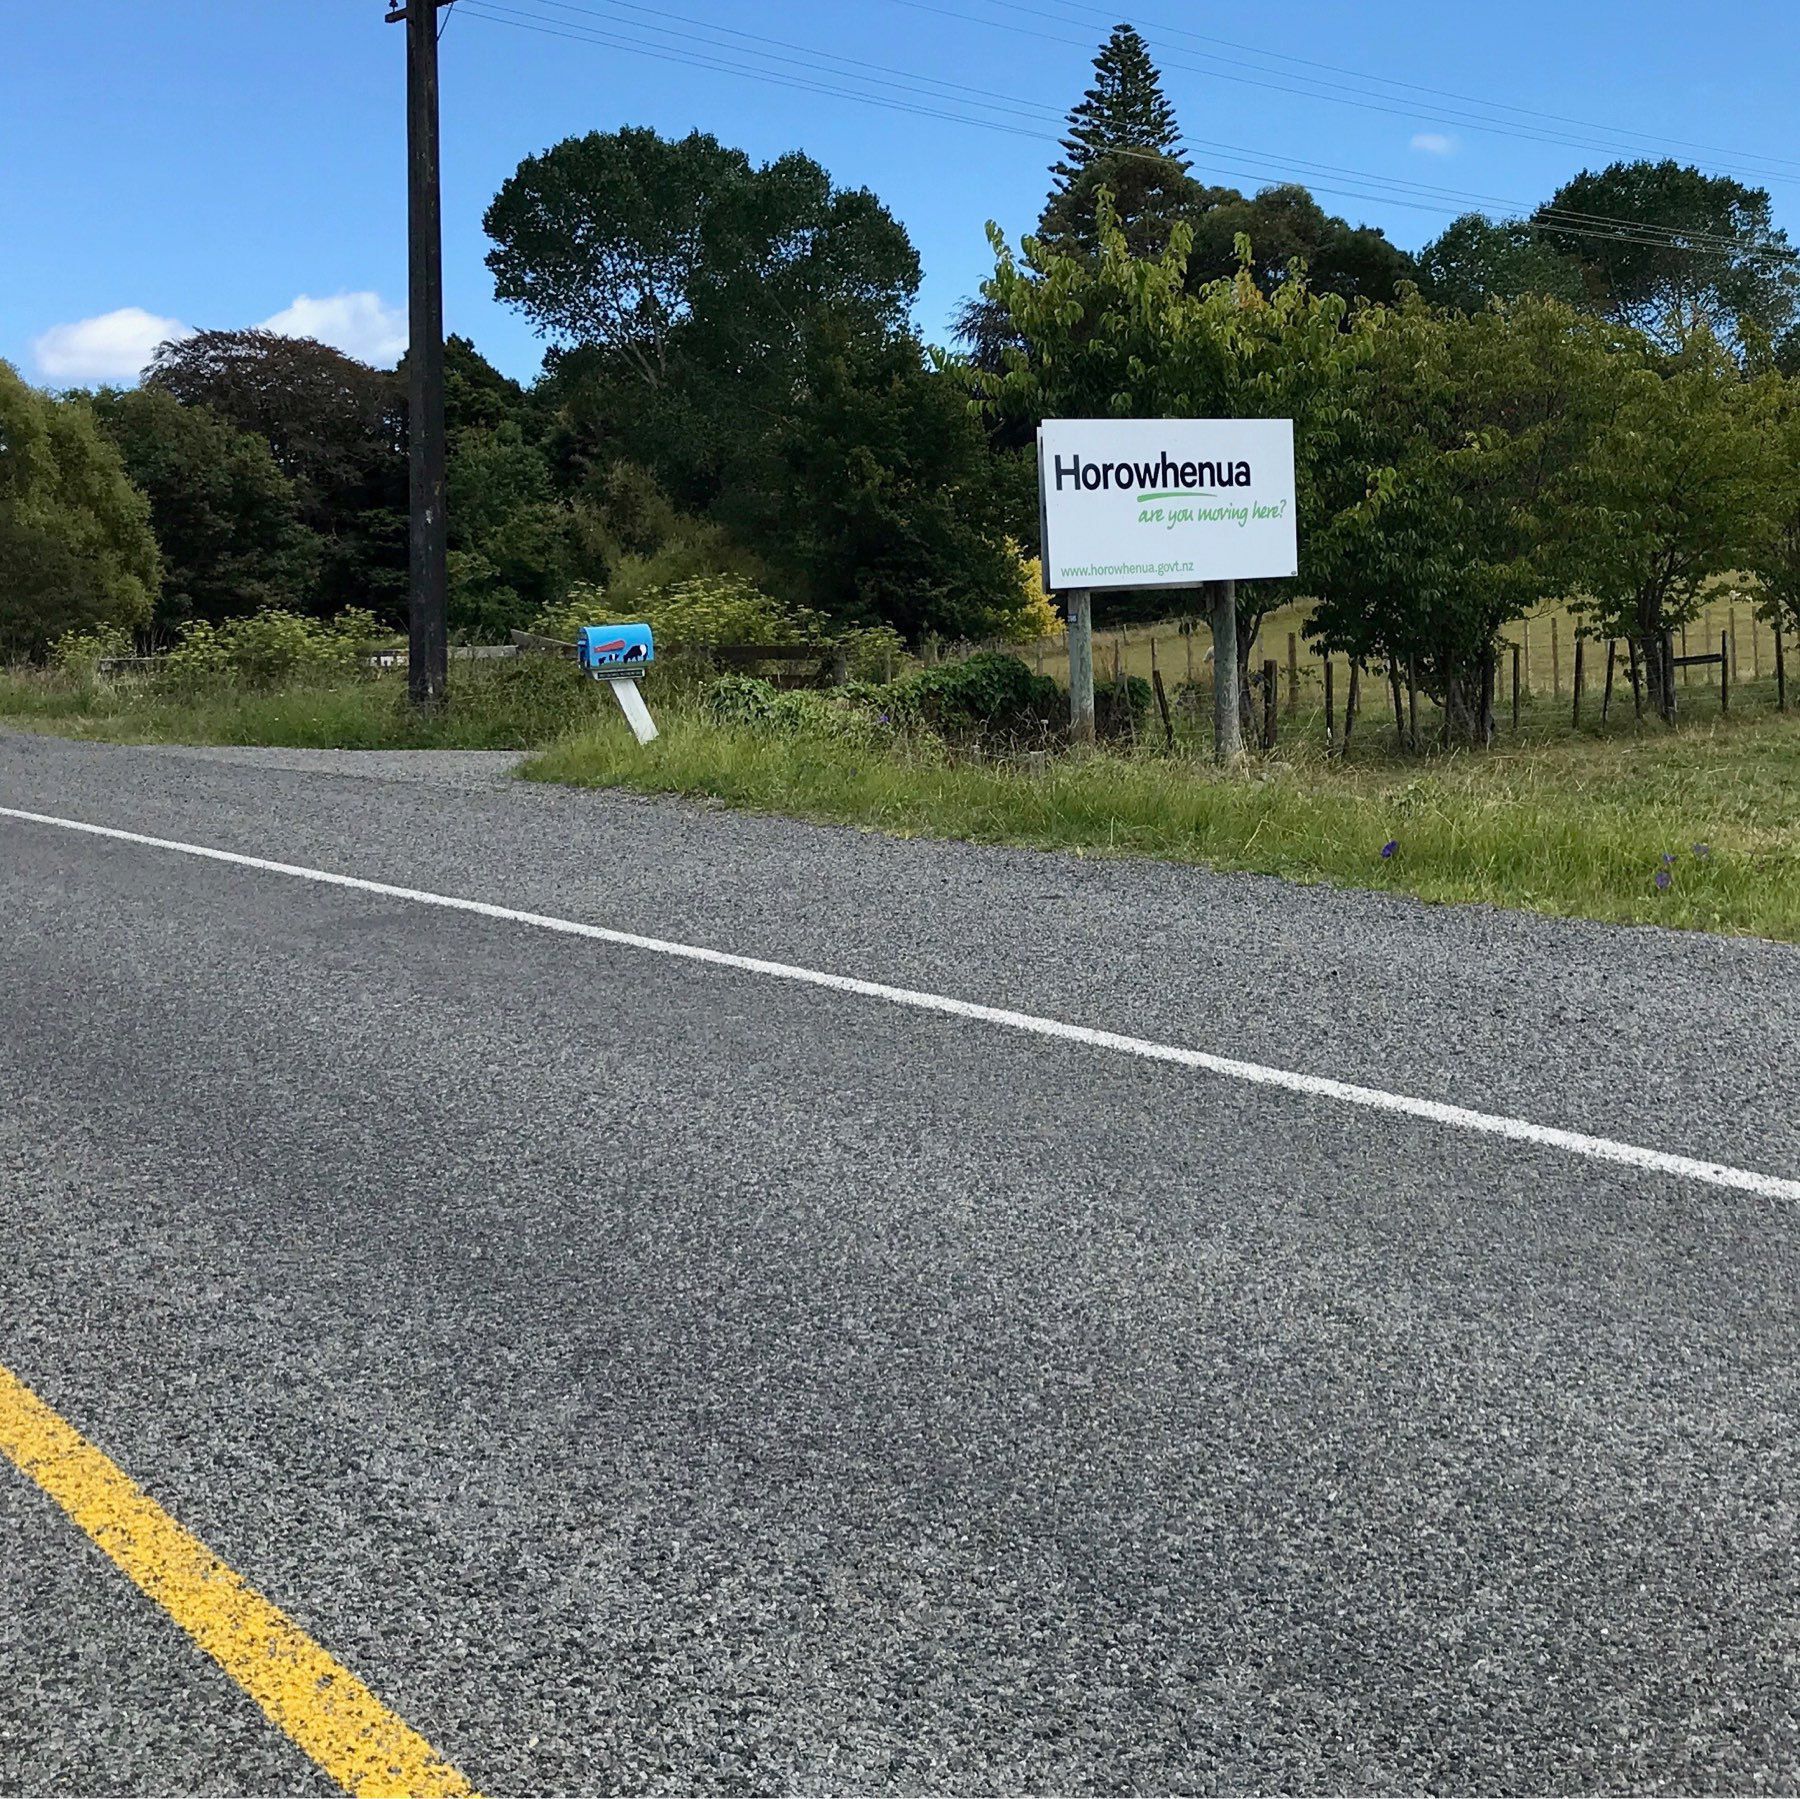 A sign that says : Horowhenua are you moving here. 